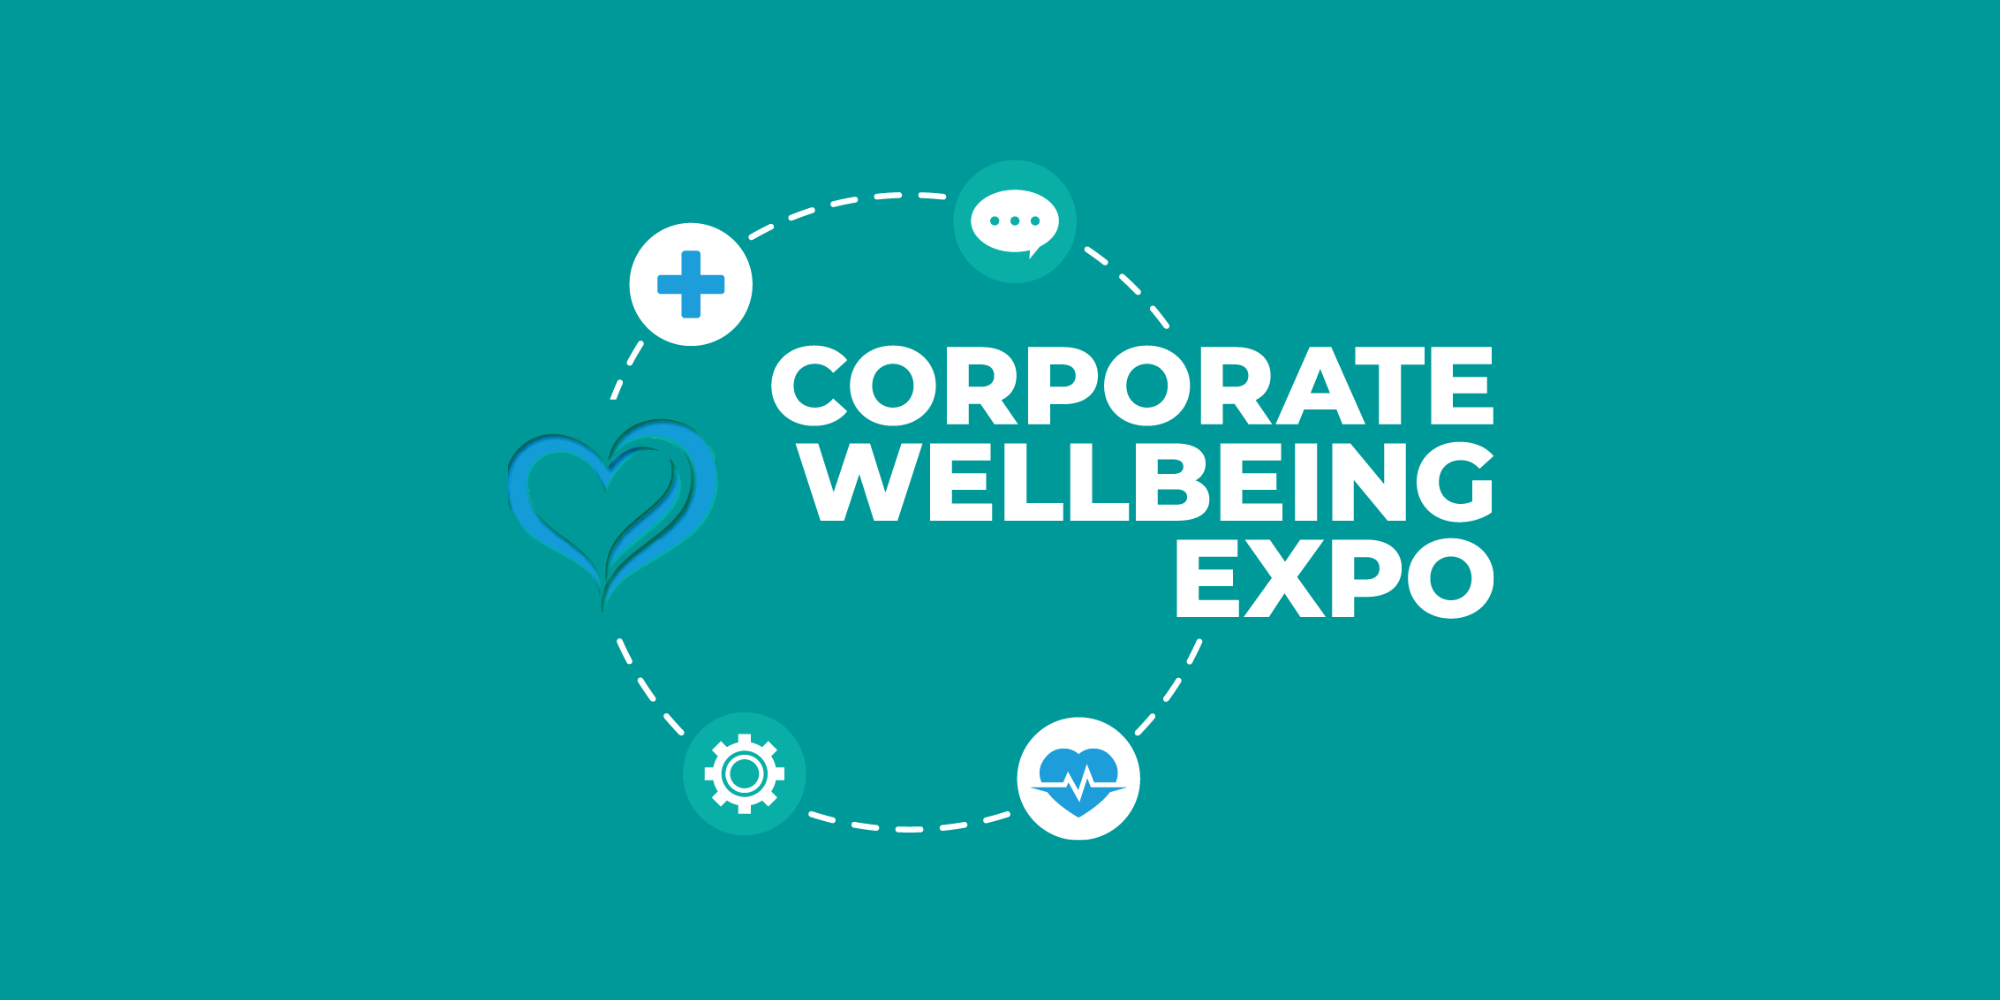 The Corporate Wellbeing Expo